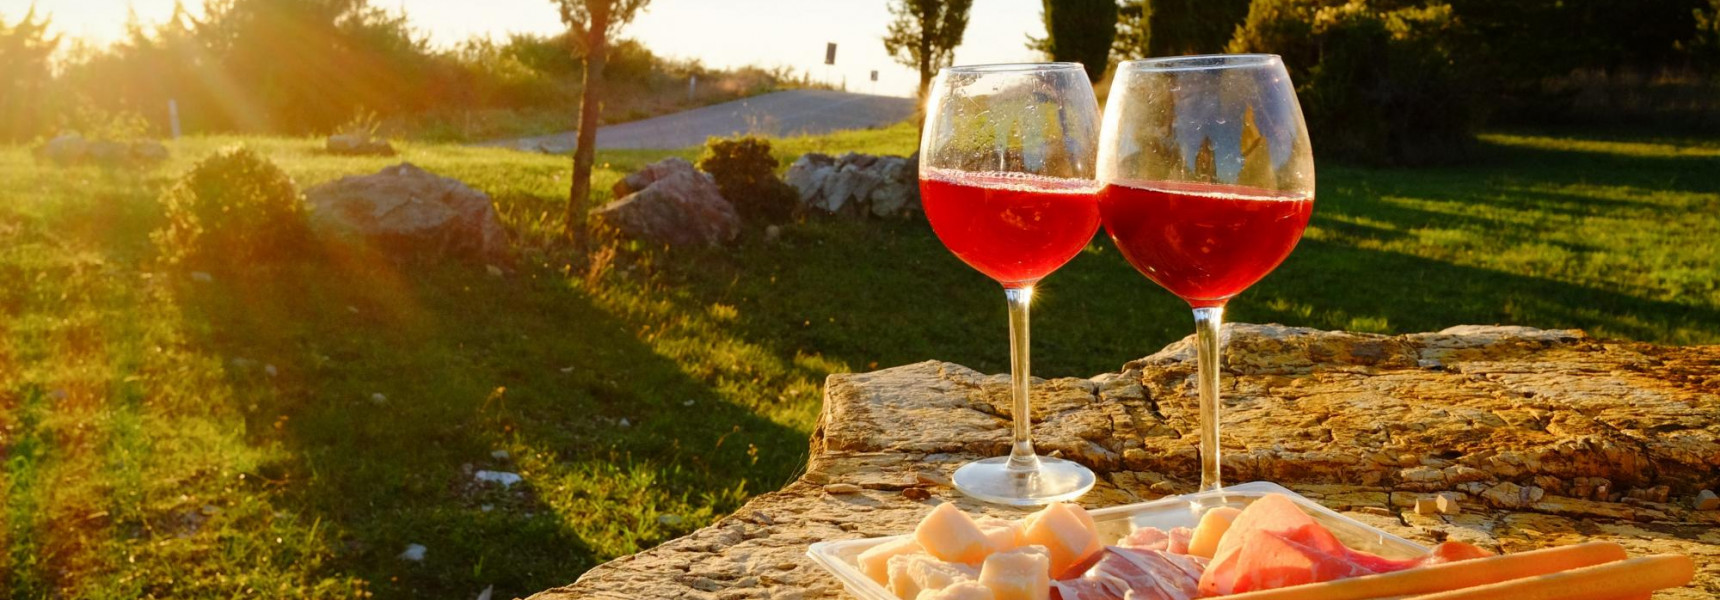 The History of the Tuscan Wine Region